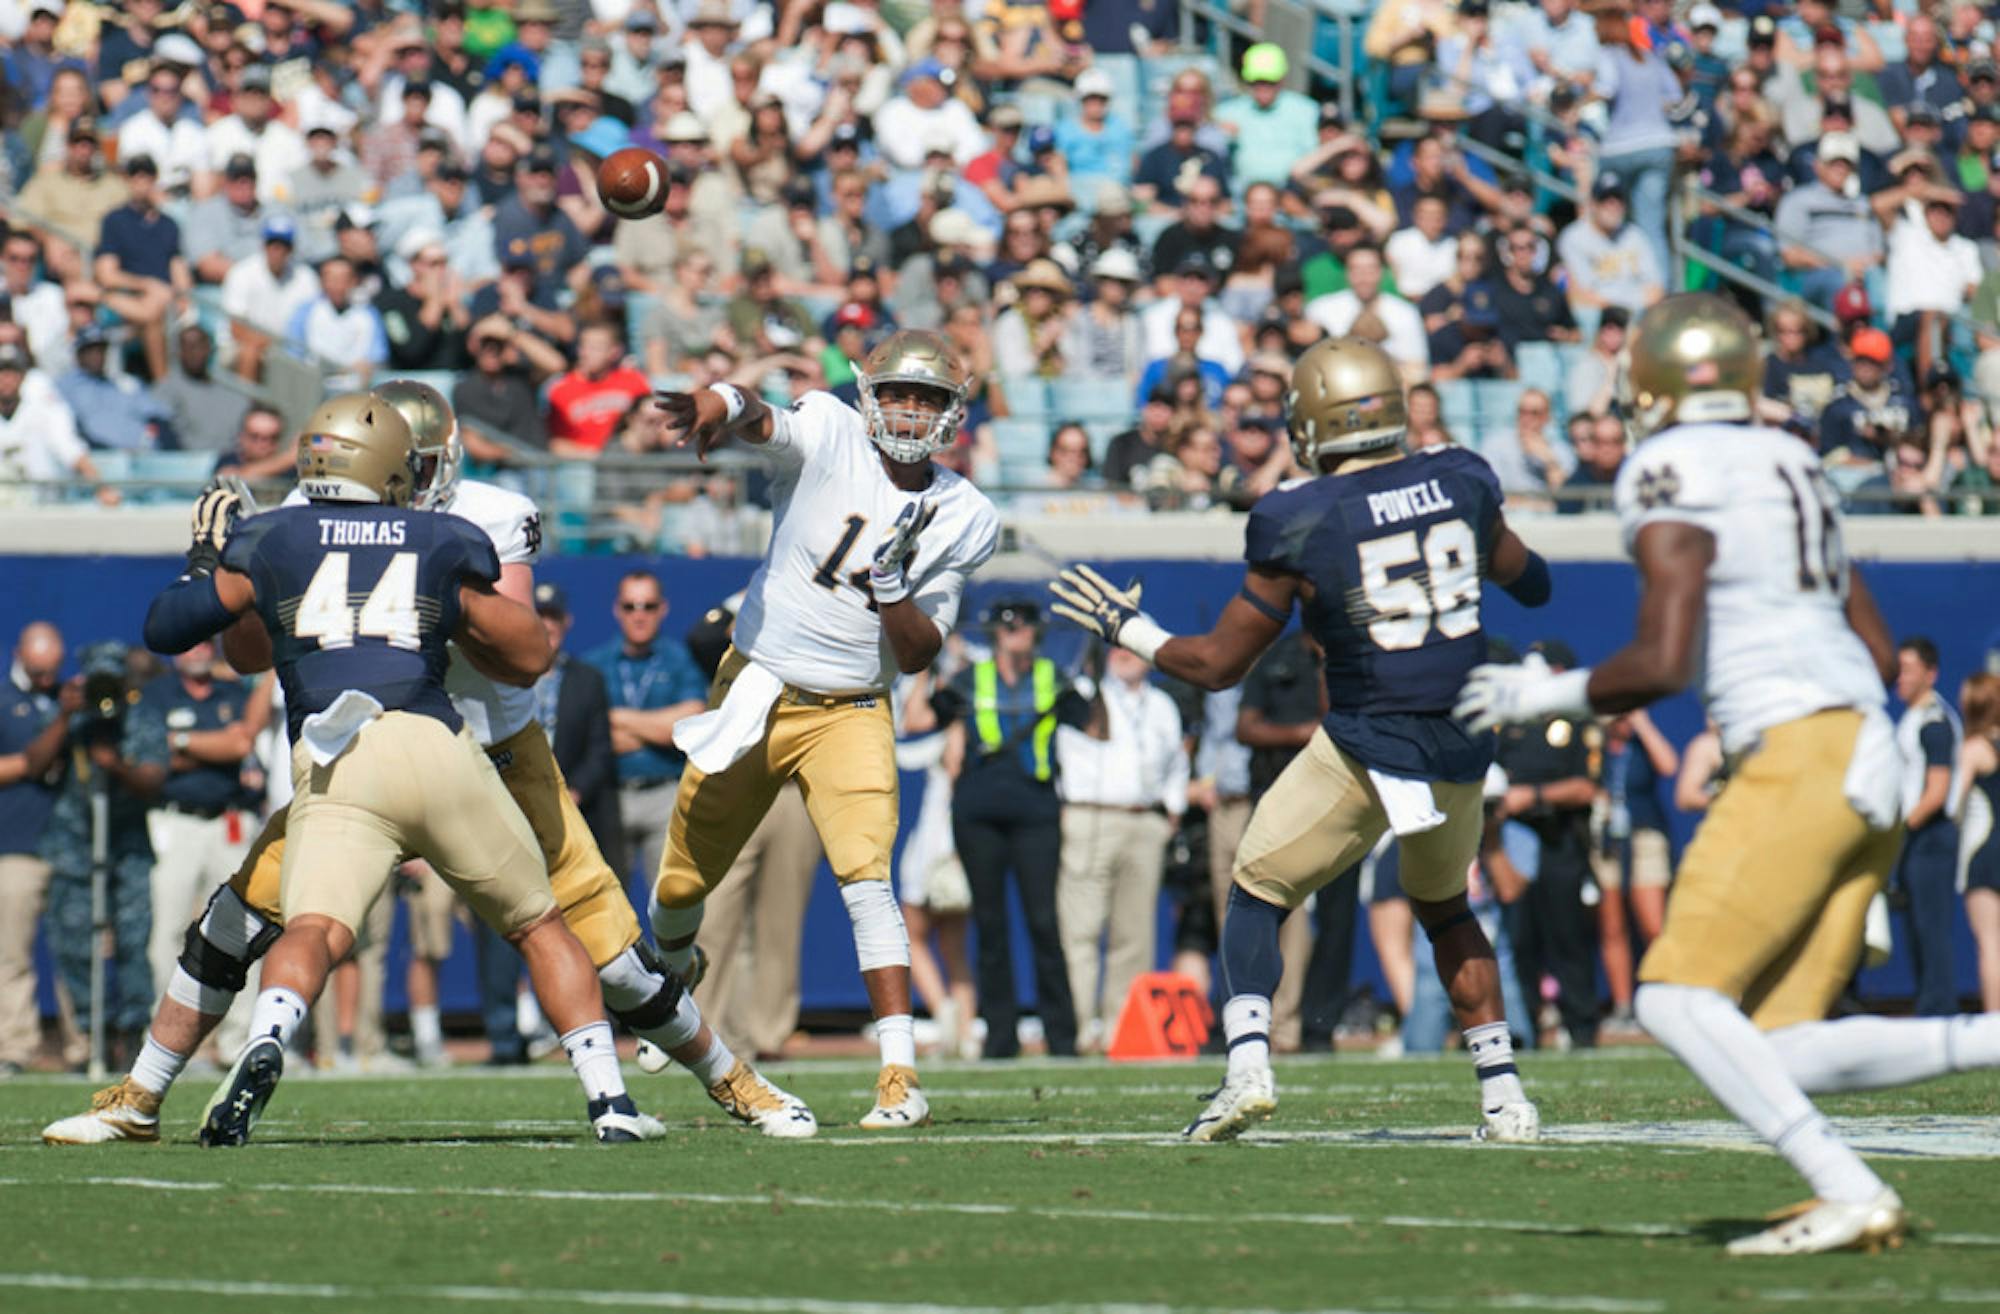 Former Irish quarterback DeShone Kizer throws a pass during Notre Dame’s 28-27 loss to Navy at EverBank Field in Jacksonville, Florida, on Nov. 5. Kizer was named the starting quarterback of the Cleveland Browns, who begin their season against the Pittsburgh Steelers on Sept. 10. Kizer was selected as the No. 52 overall pick in the 2017 NFL Draft, forgoing his final two season of eligibility at Notre Dame.